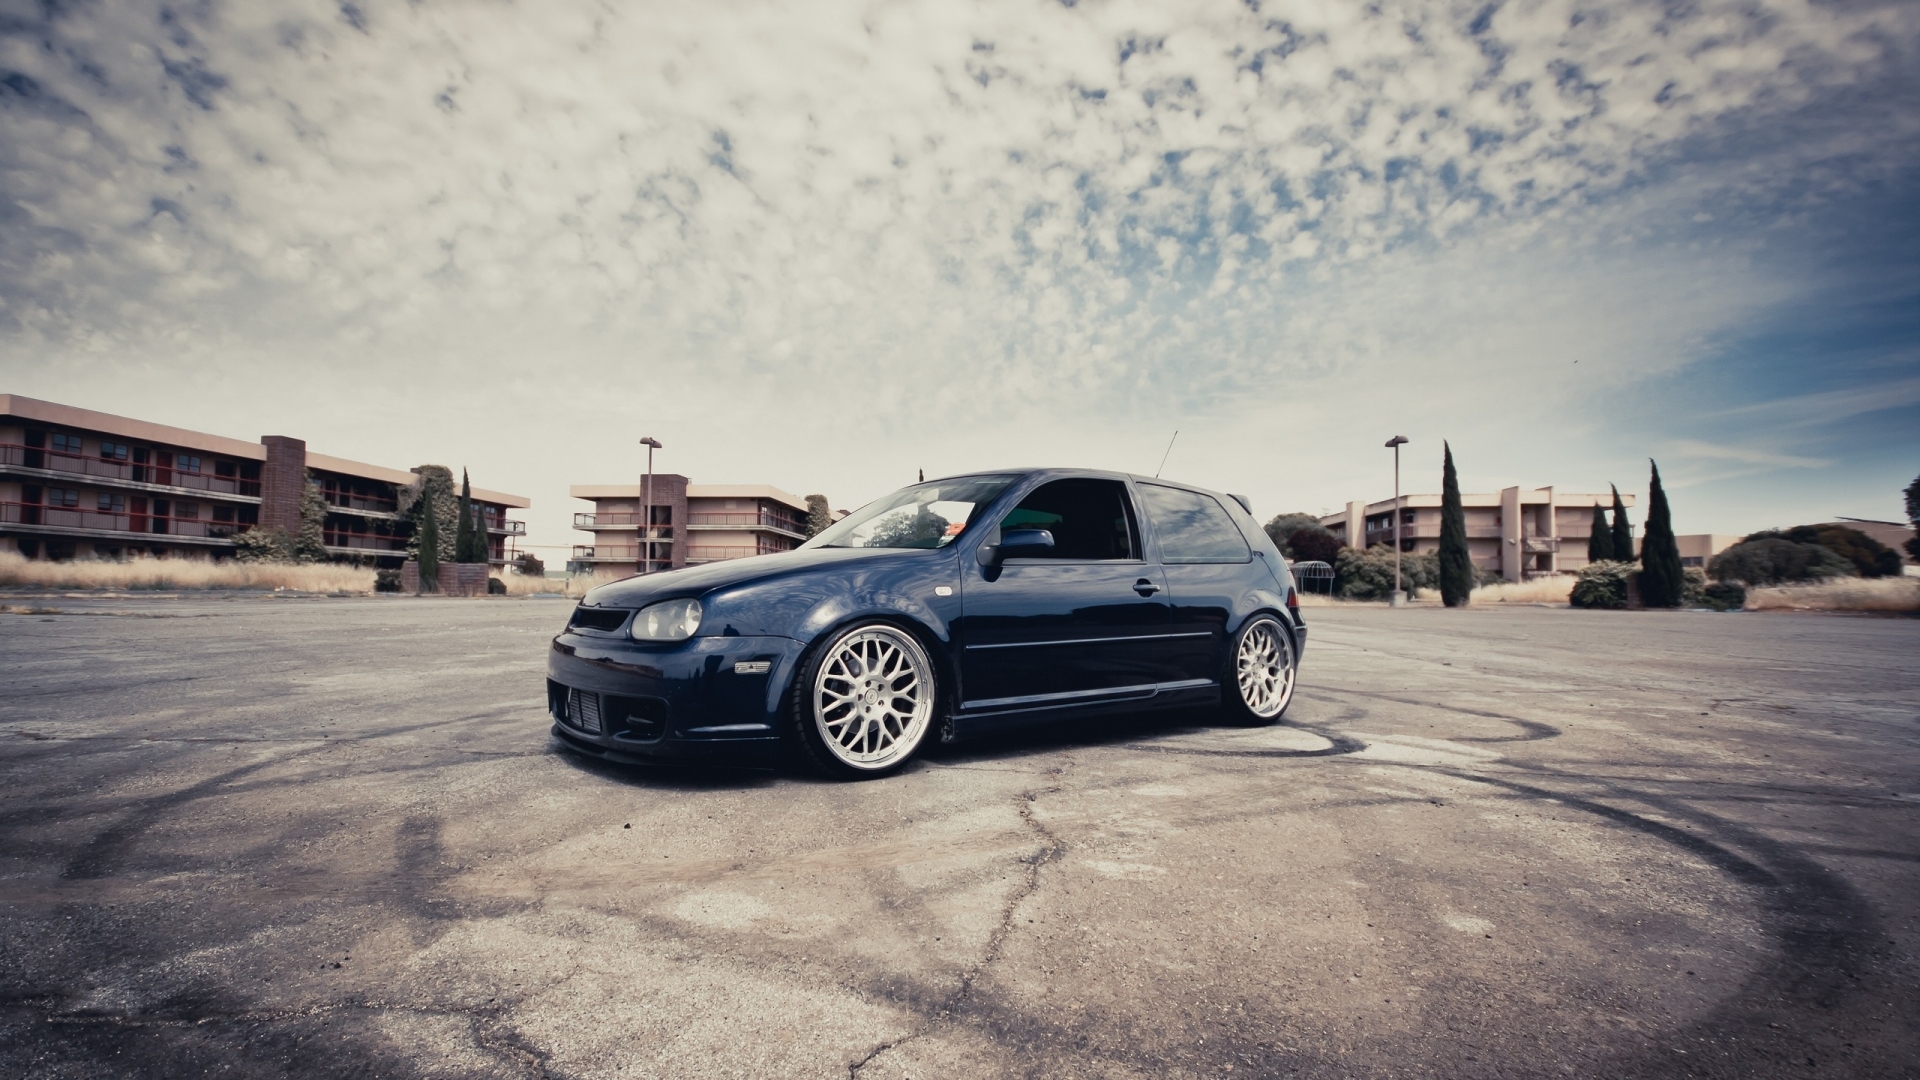 VW Golf III Coupe Tuning for 1920 x 1080 HDTV 1080p resolution